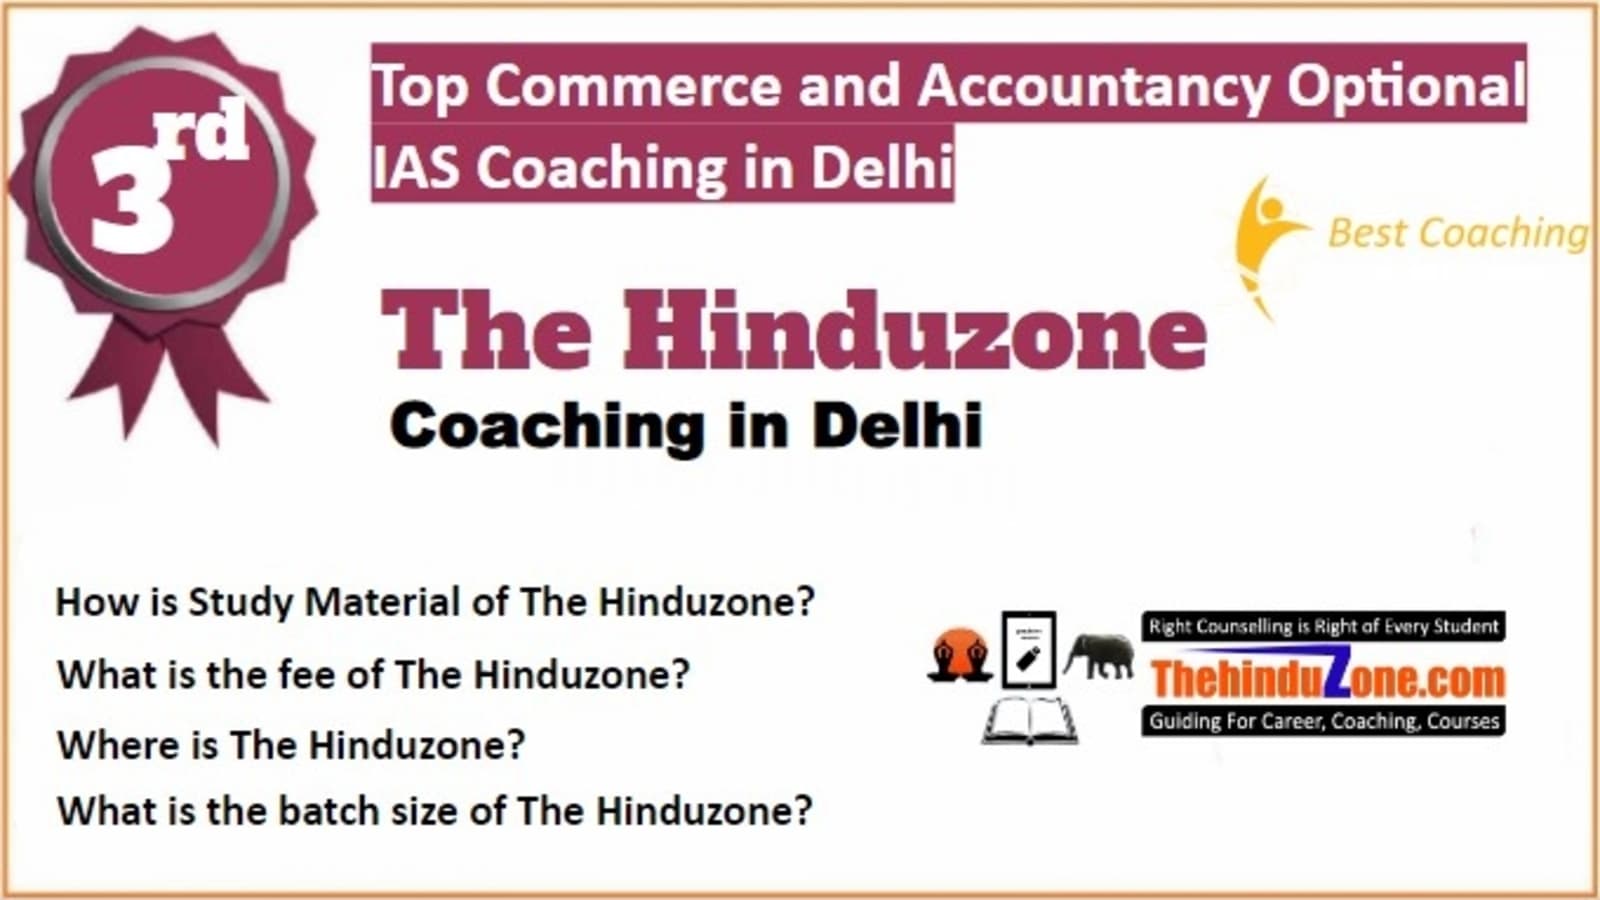 Rank 3 Best Commerce and Accountancy Optional IAS Coaching in Delhi